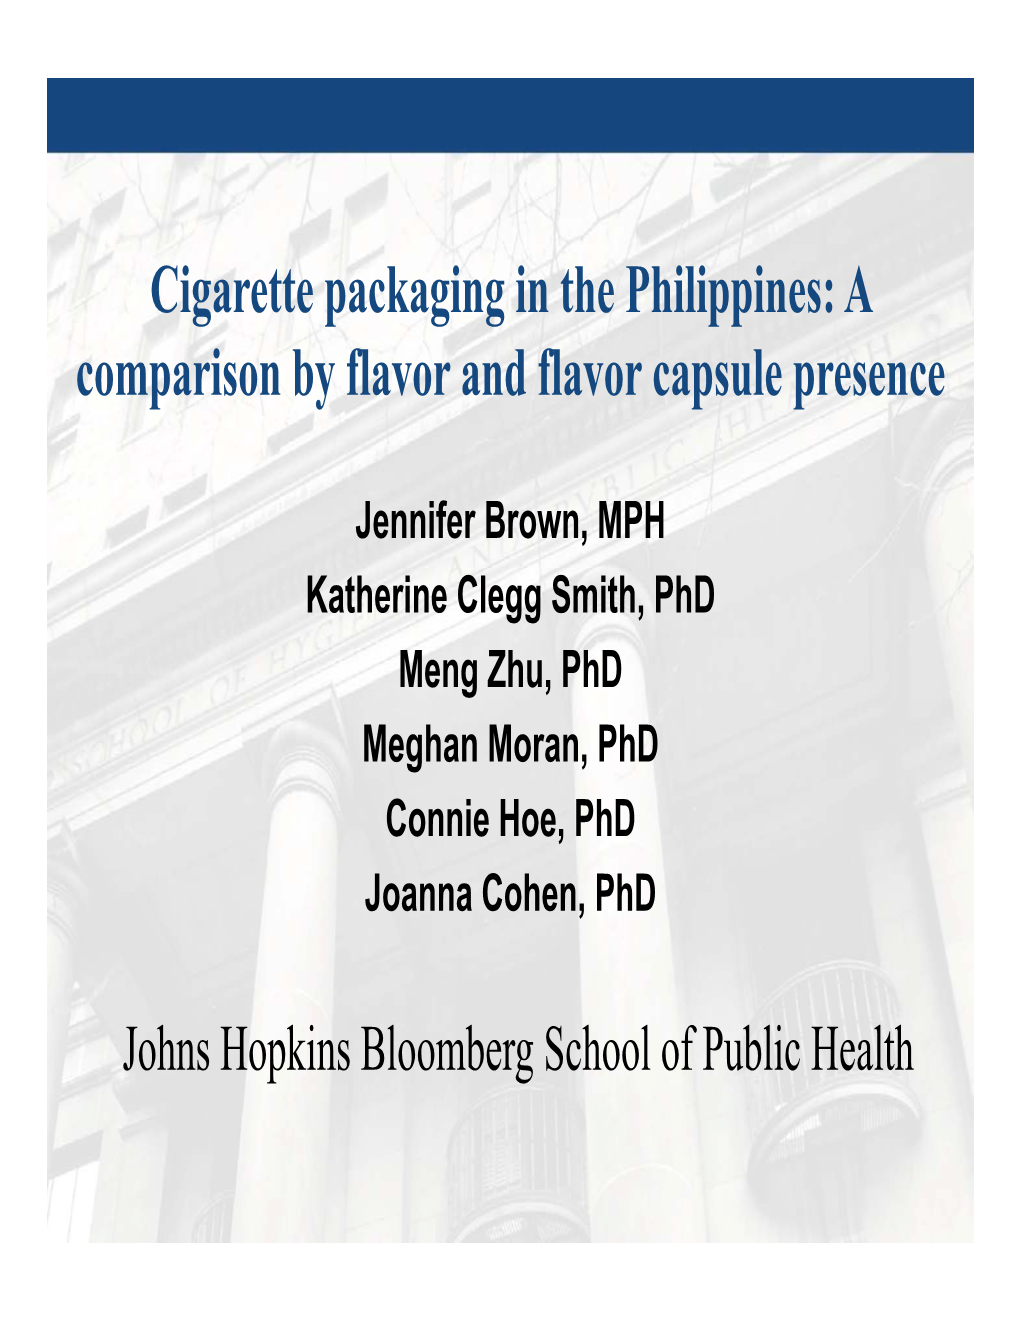 Cigarette Packaging in the Philippines: a Comparison by Flavor and Flavor Capsule Presence